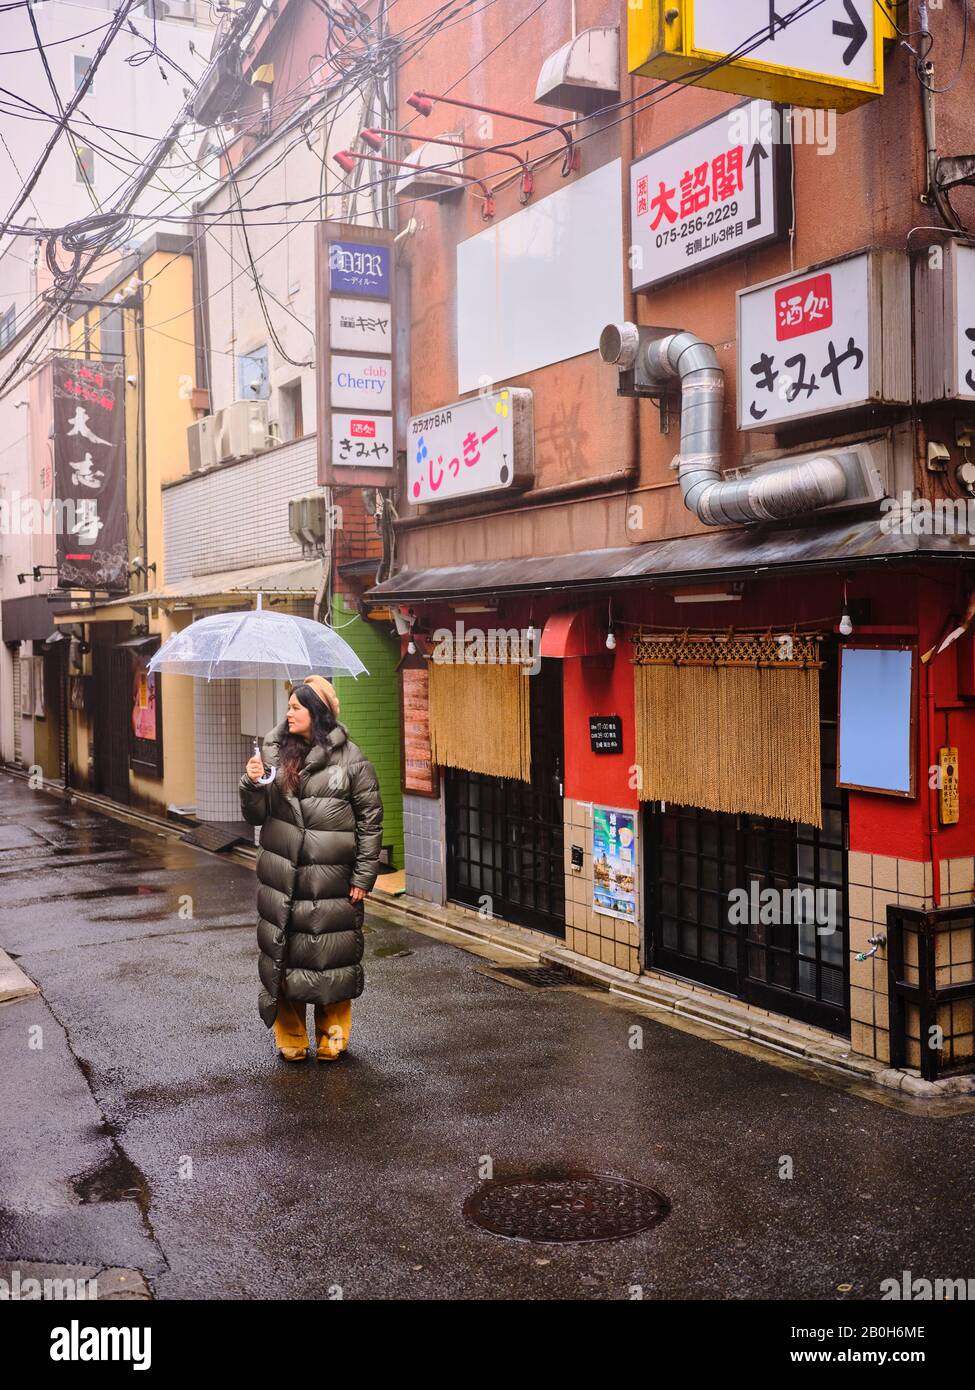 Woman in long rain jacket stands with umbrella in an alley Kyoto Japan Stock Photo